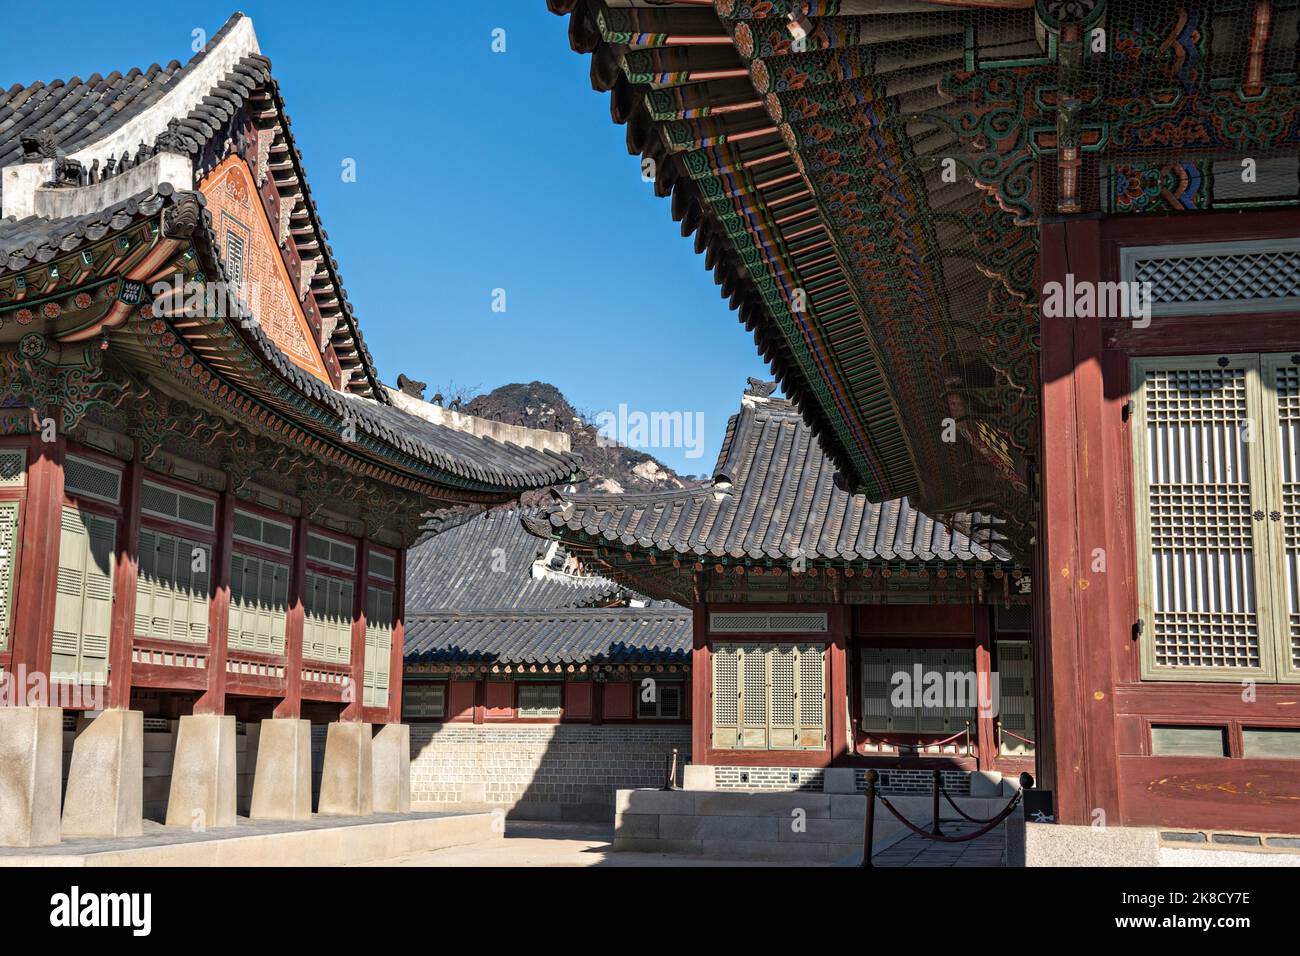 Traditional Korean buildings of the Gangnyeong-jeon or Kings Residence Hall, at the Gyeongbokgung Palace in Seoul, South Korea. Stock Photo